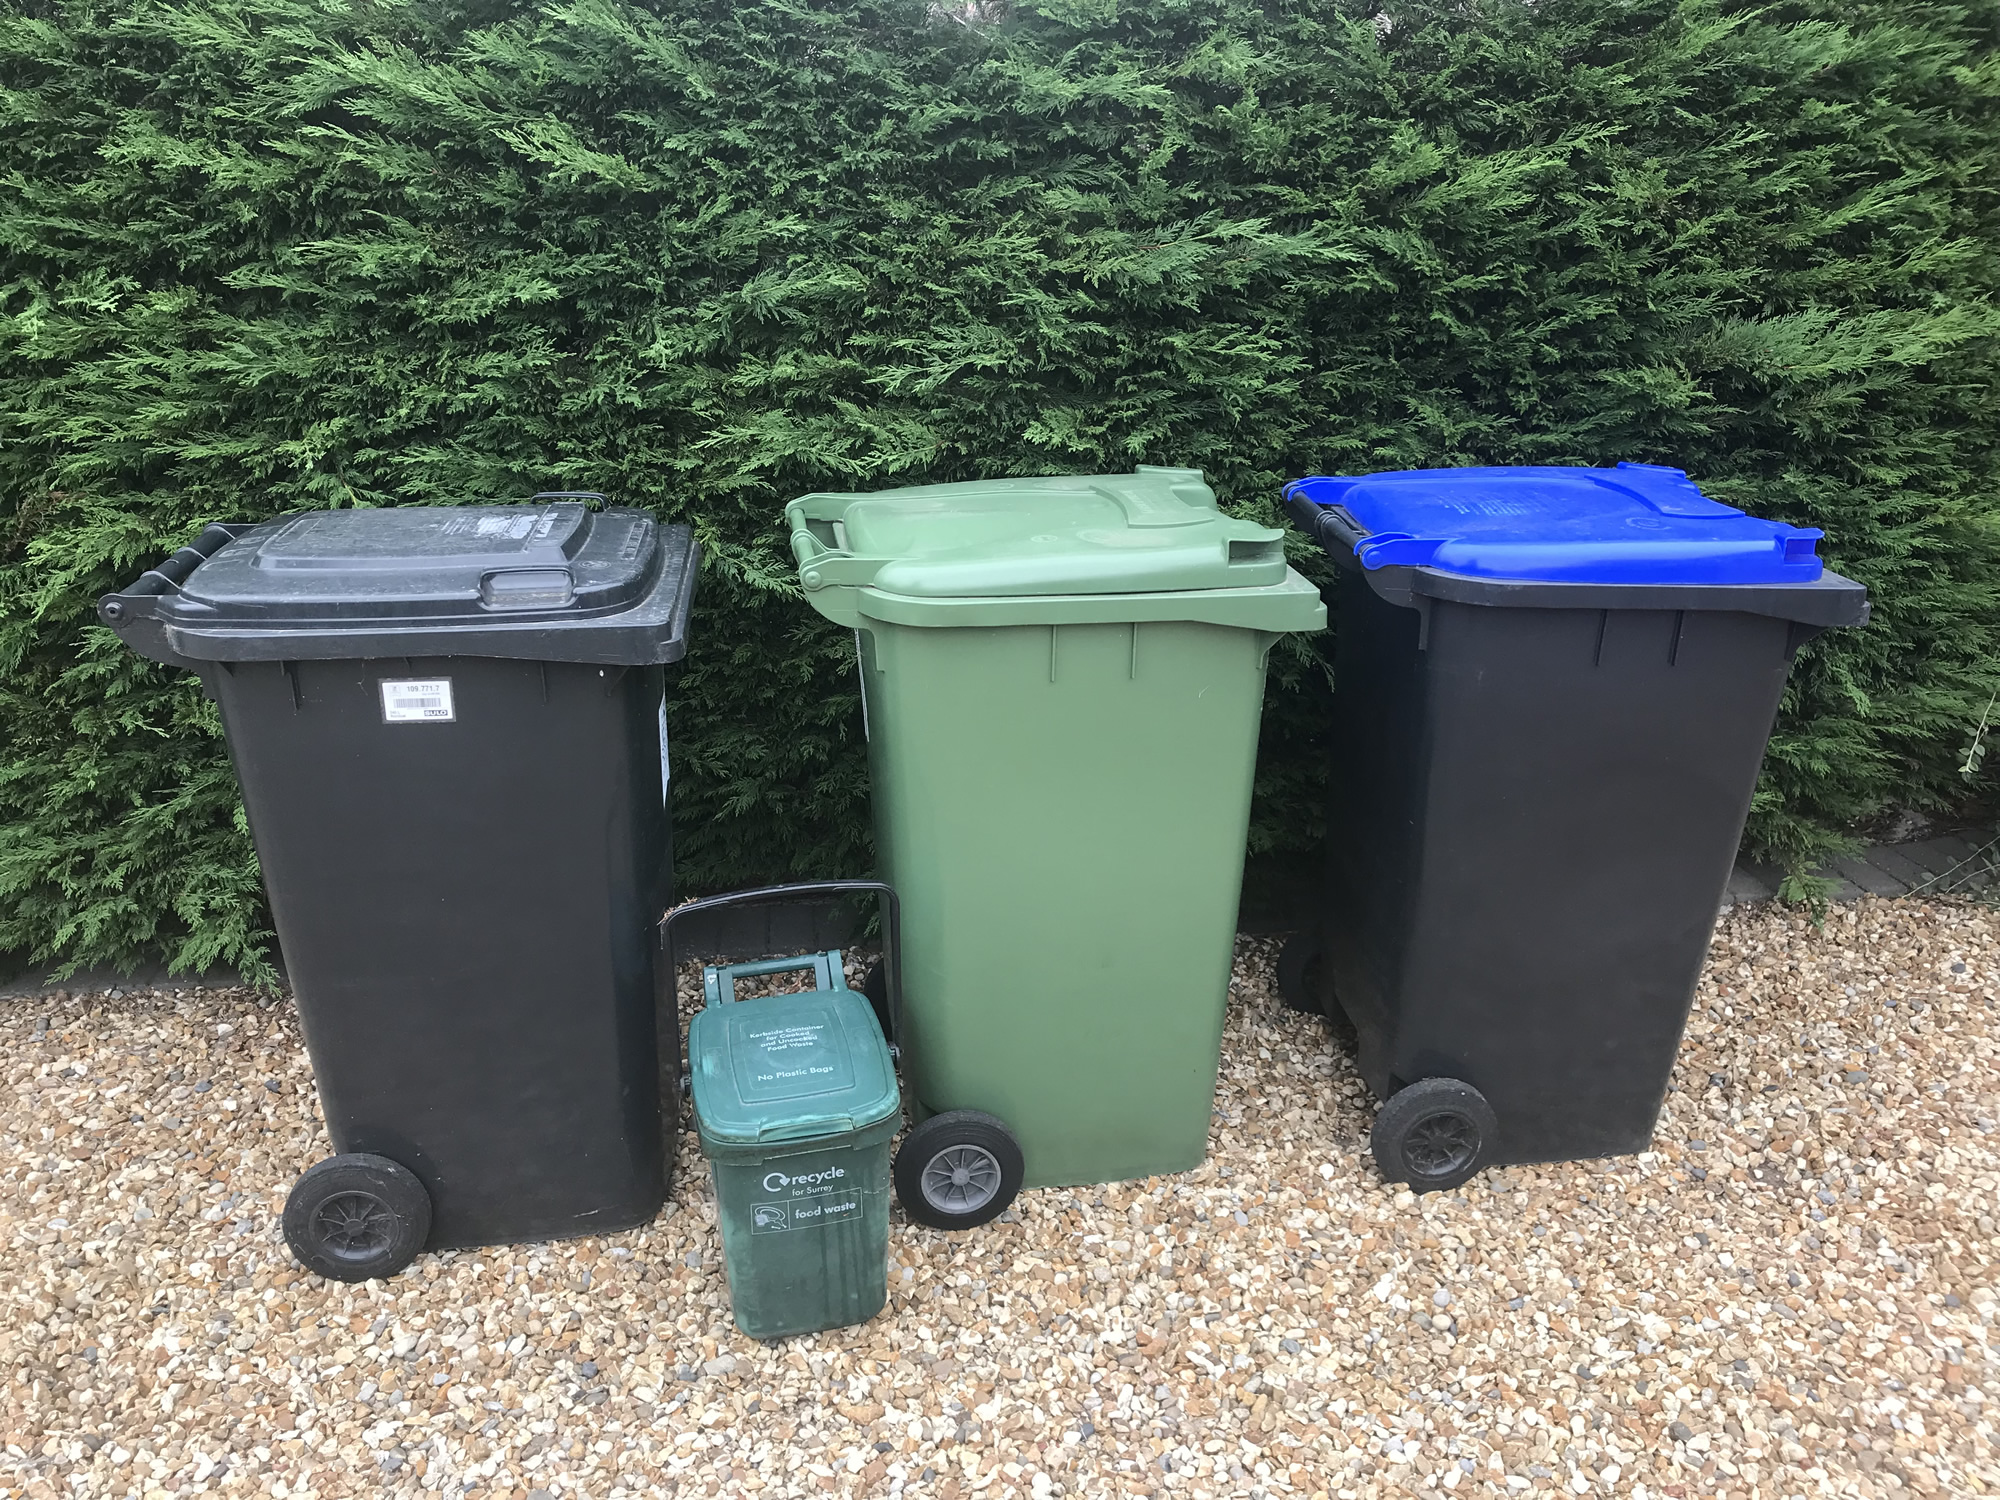 Rubbish Food Waste and Recycling Bins - Elmbridge and Woking Surrey